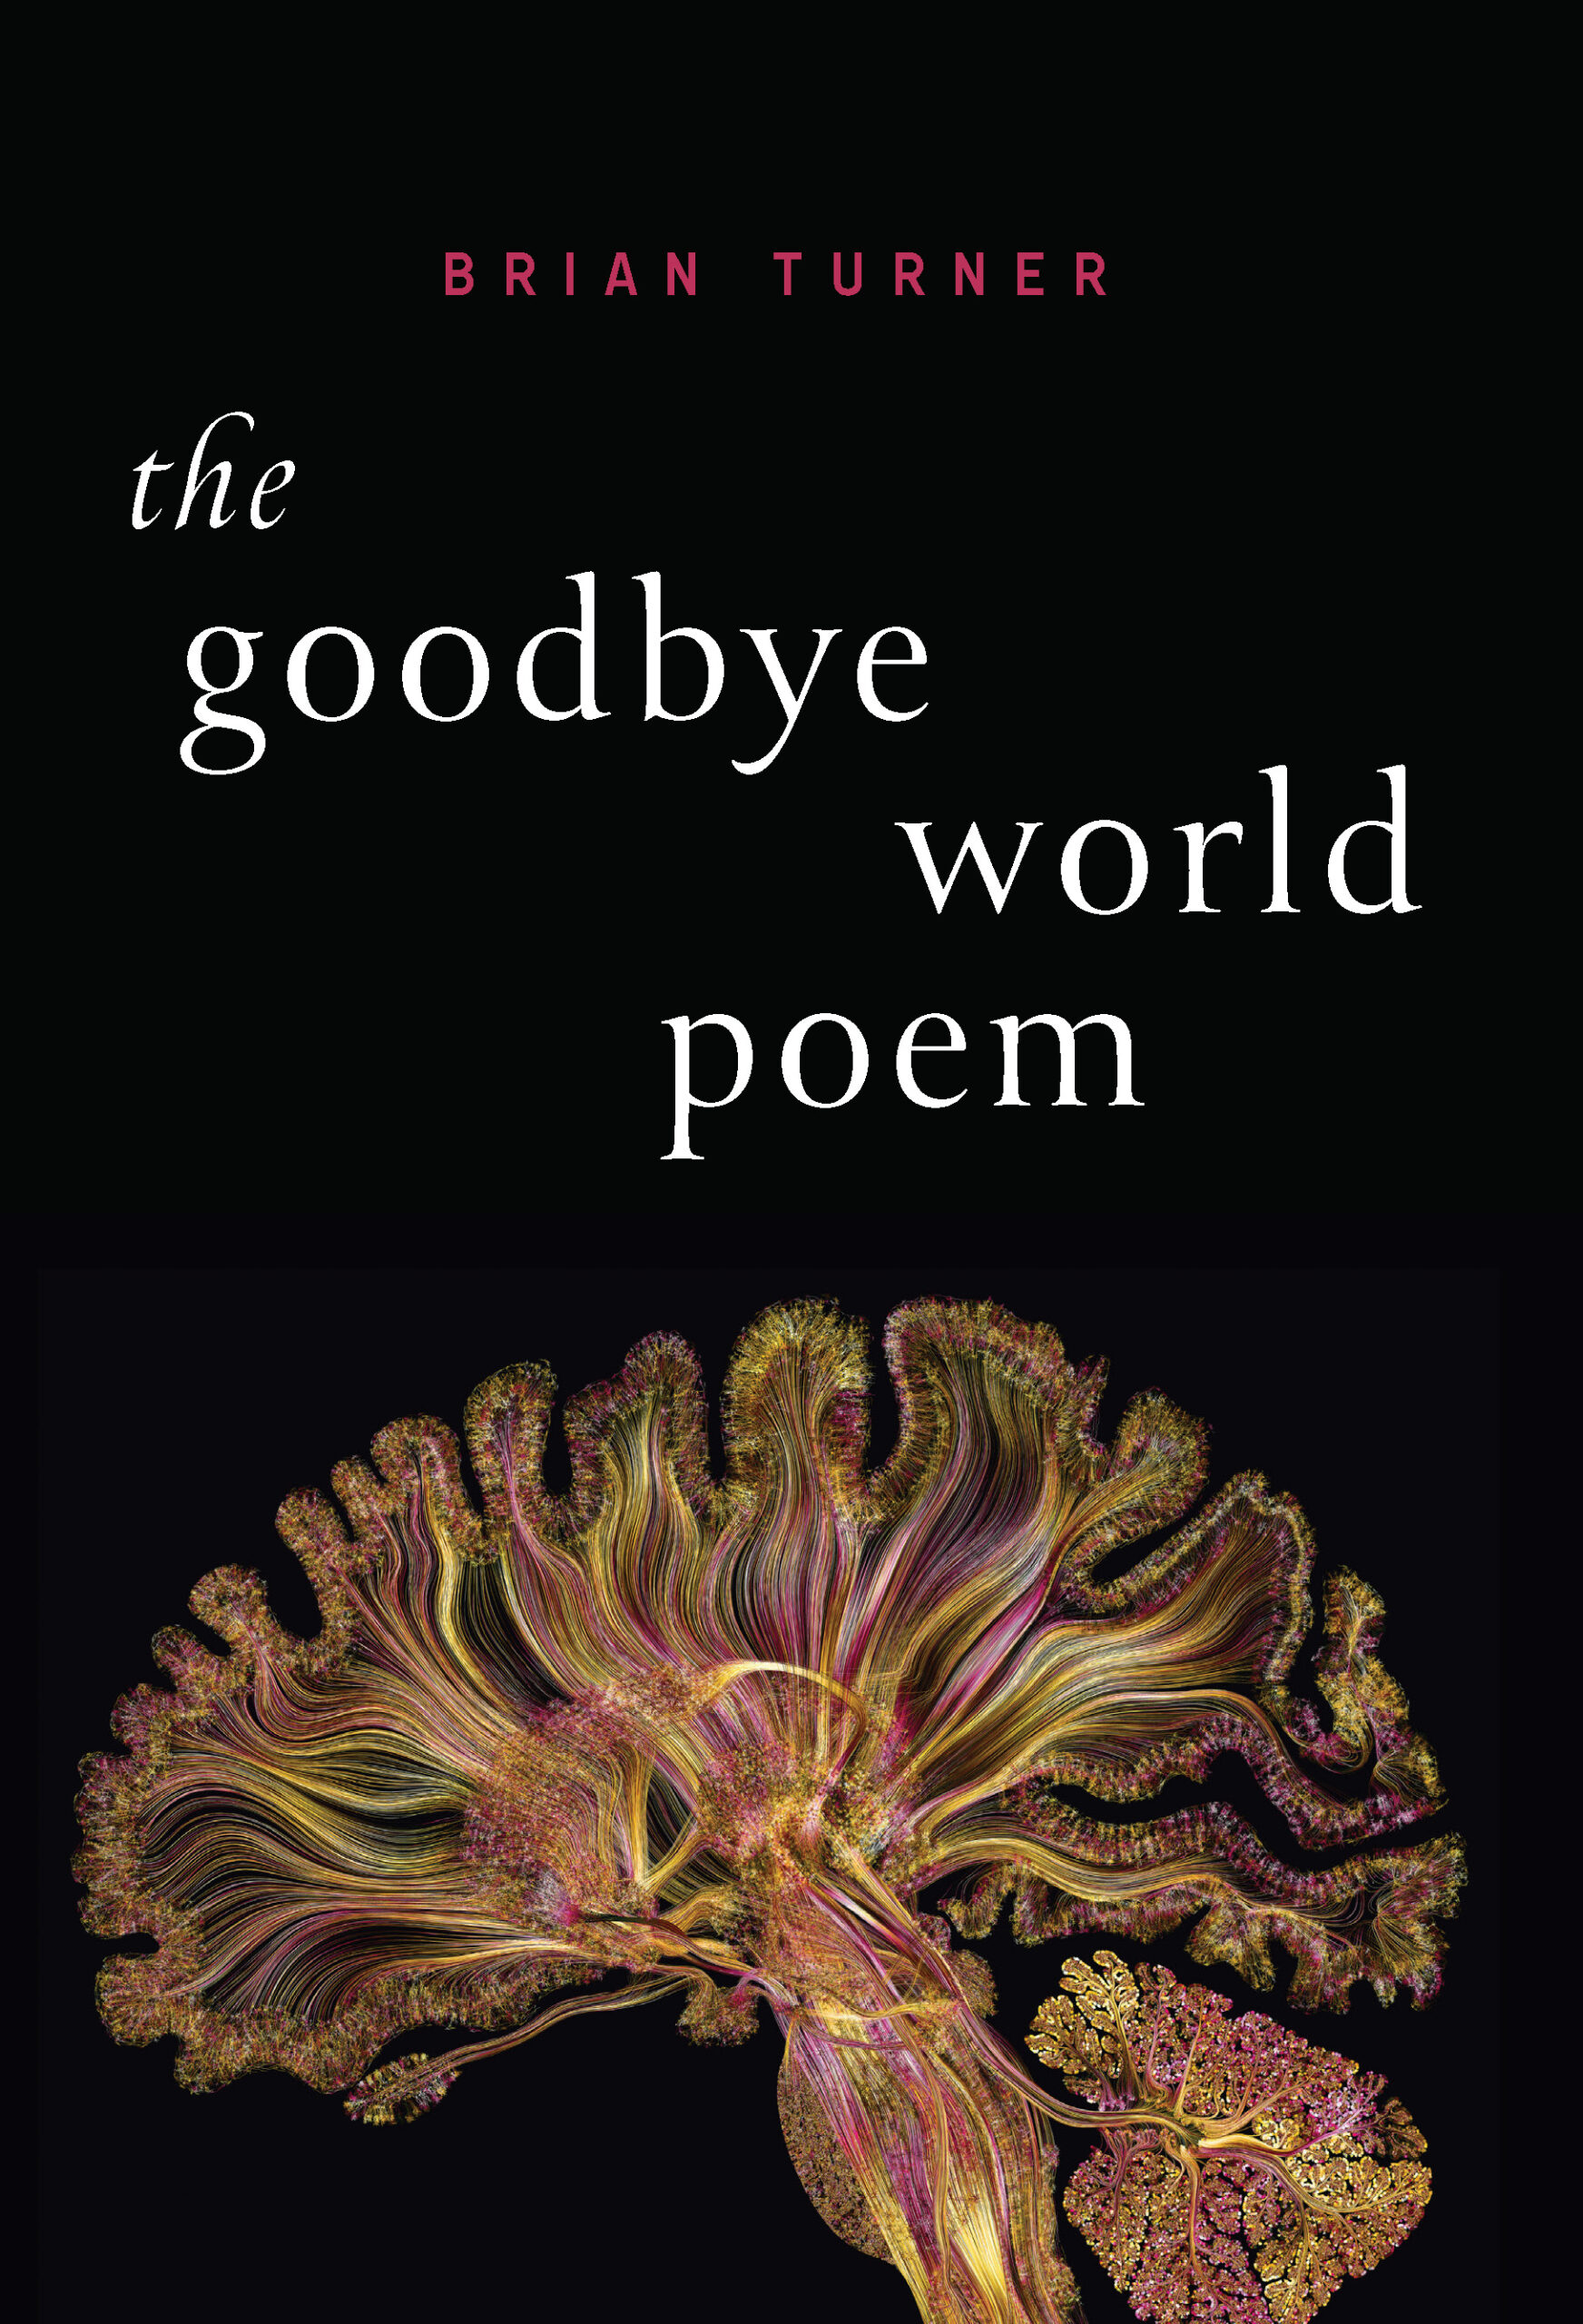 Book Cover Image of “The Goodbye World Poem”